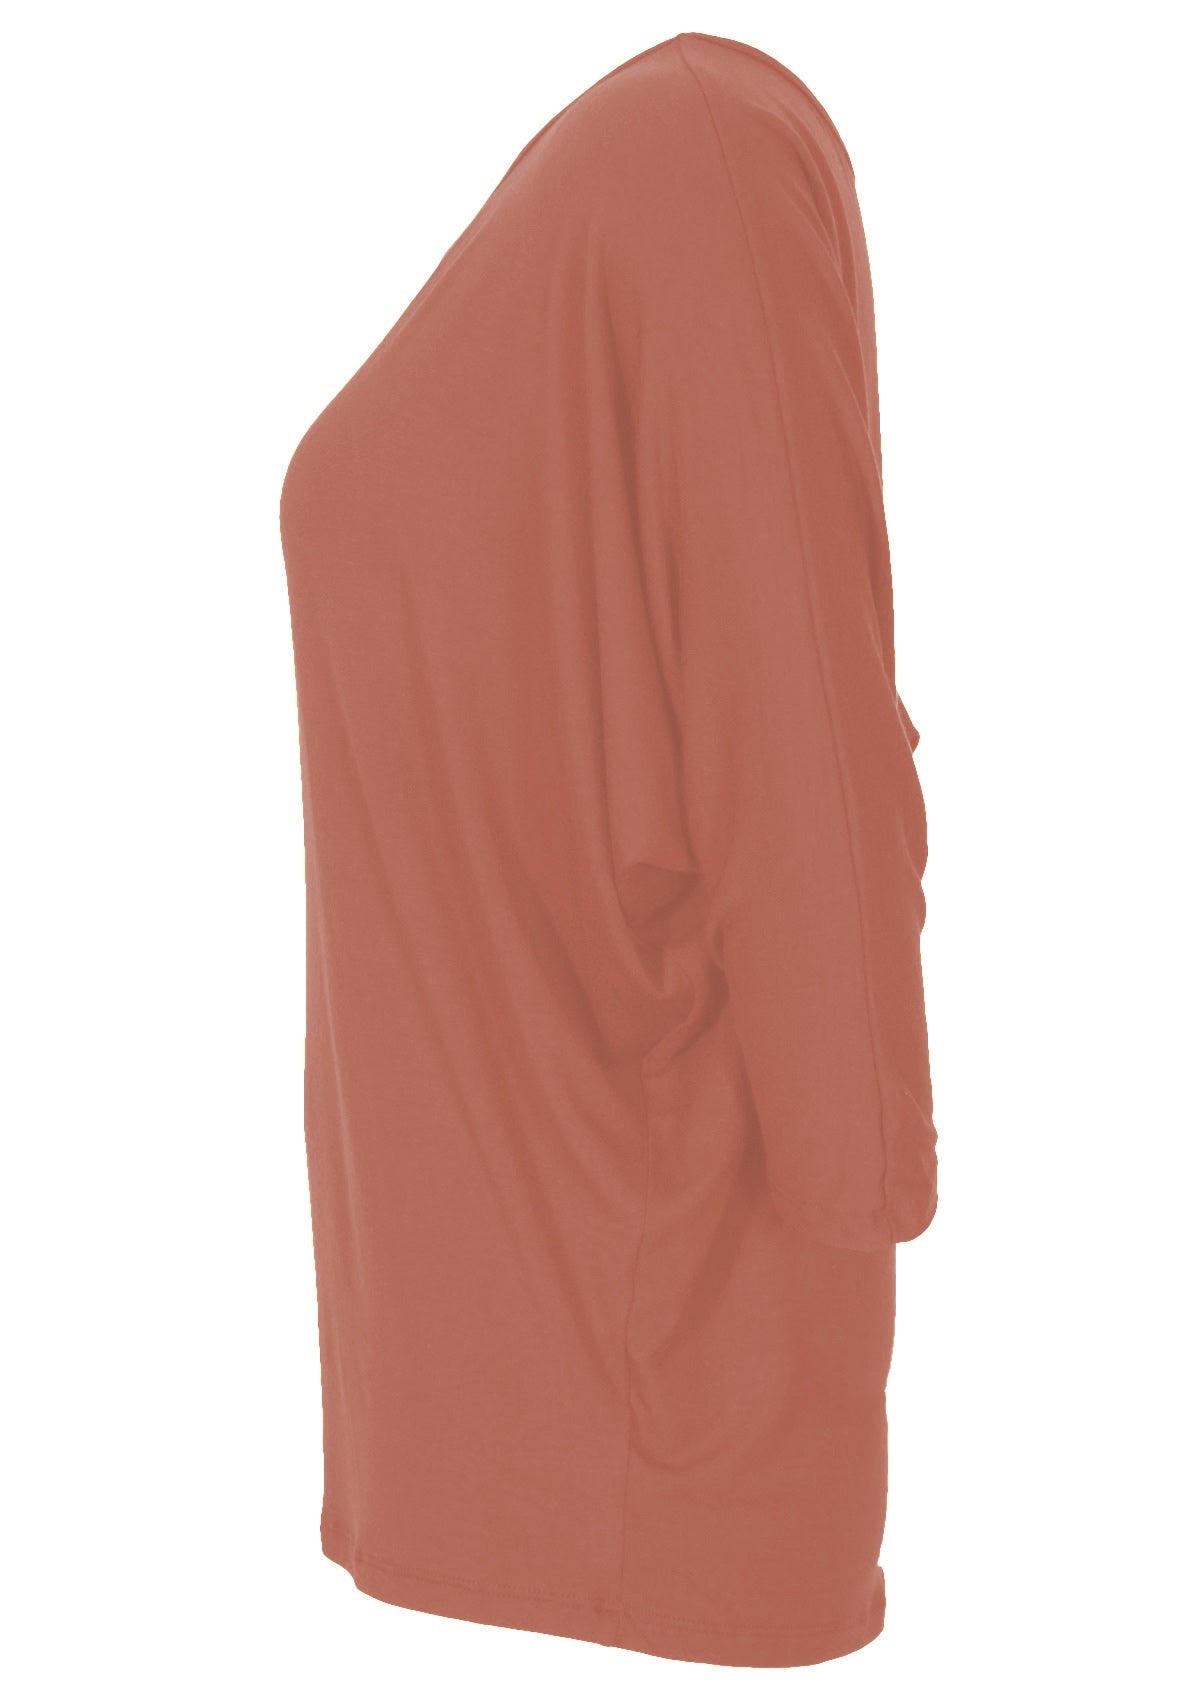 Side view of women's 3/4 sleeve rayon batwing round neckline dusty pink top.